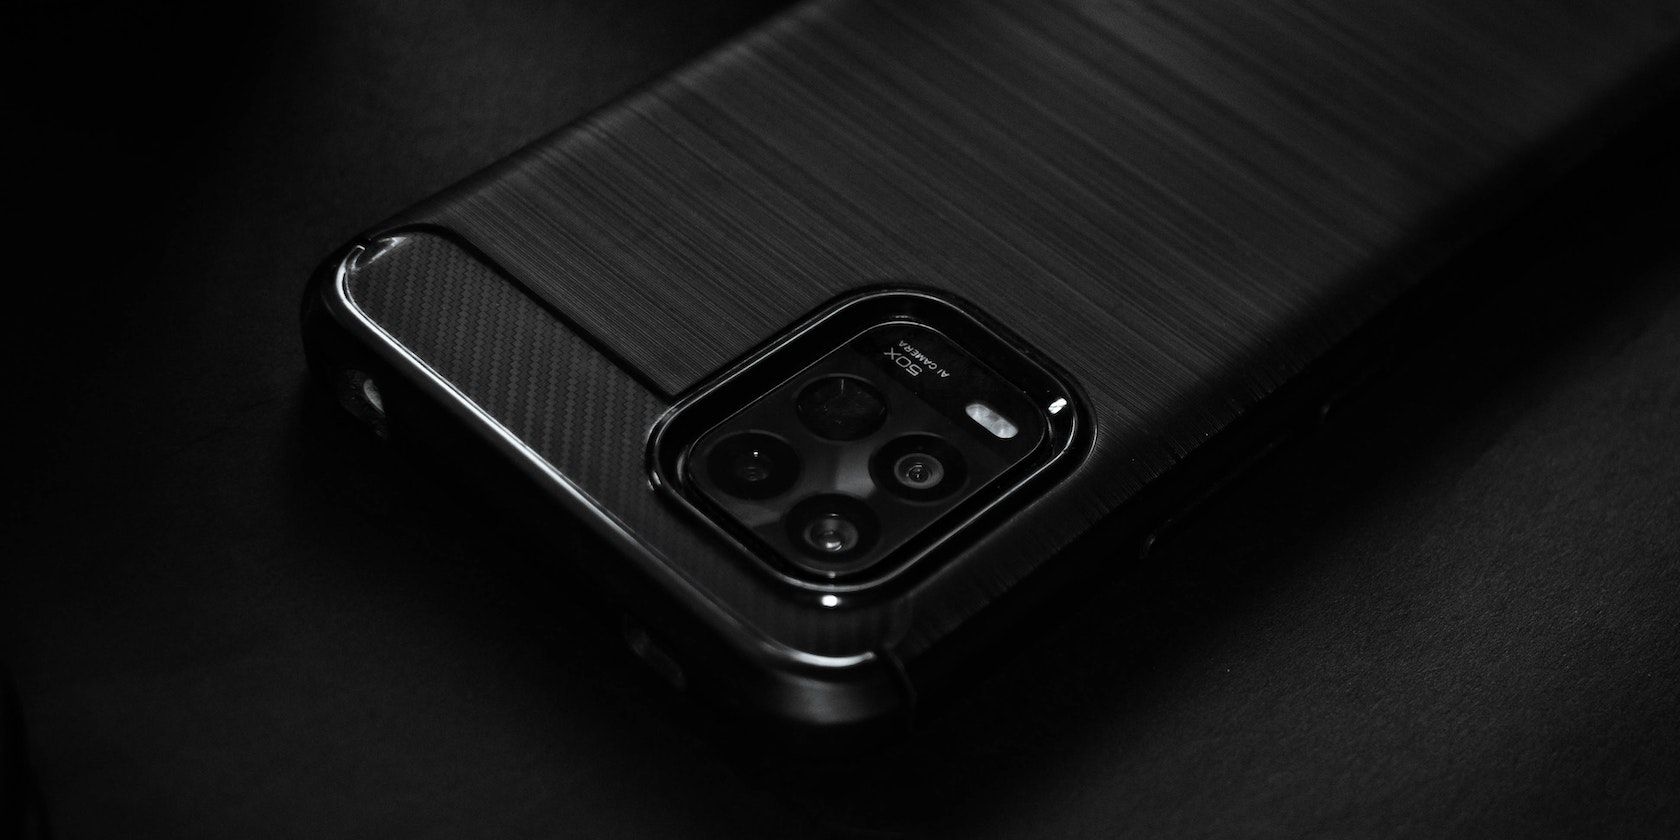 Photo of a Black Phone on a Black Surface